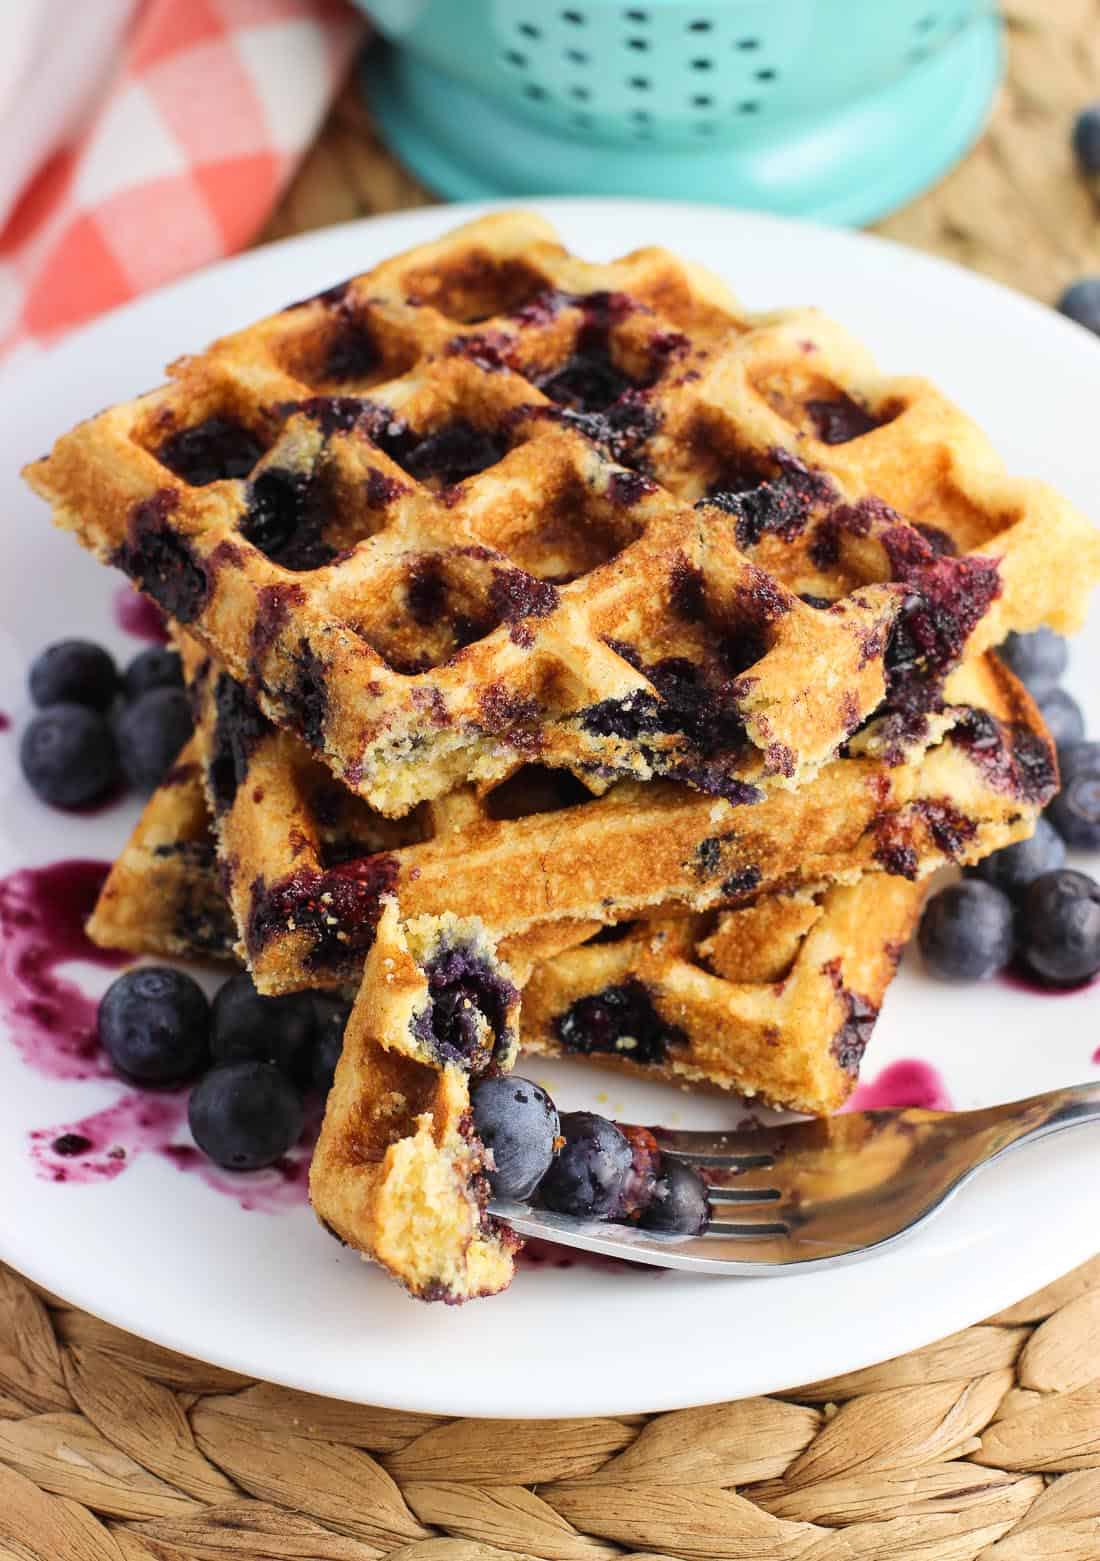 Three waffles on a plate with a forkful of blueberries and a bite of waffle in the front